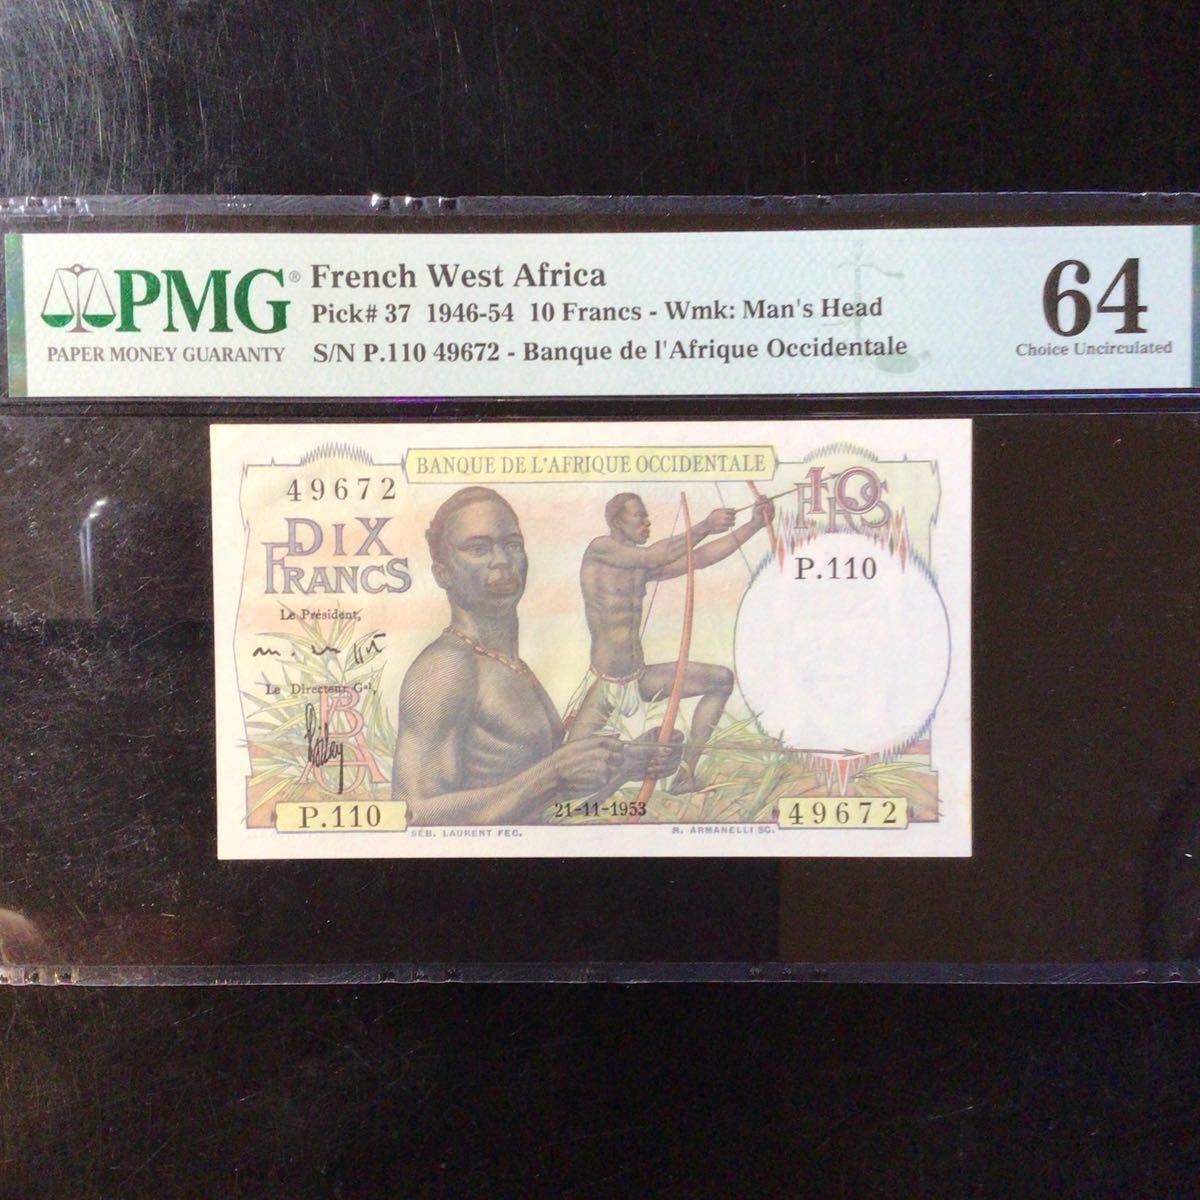 World Banknote Grading FRENCH WEST AFRICA 10 Francs【1953】『PMG Grading Choice Uncirculated 64』